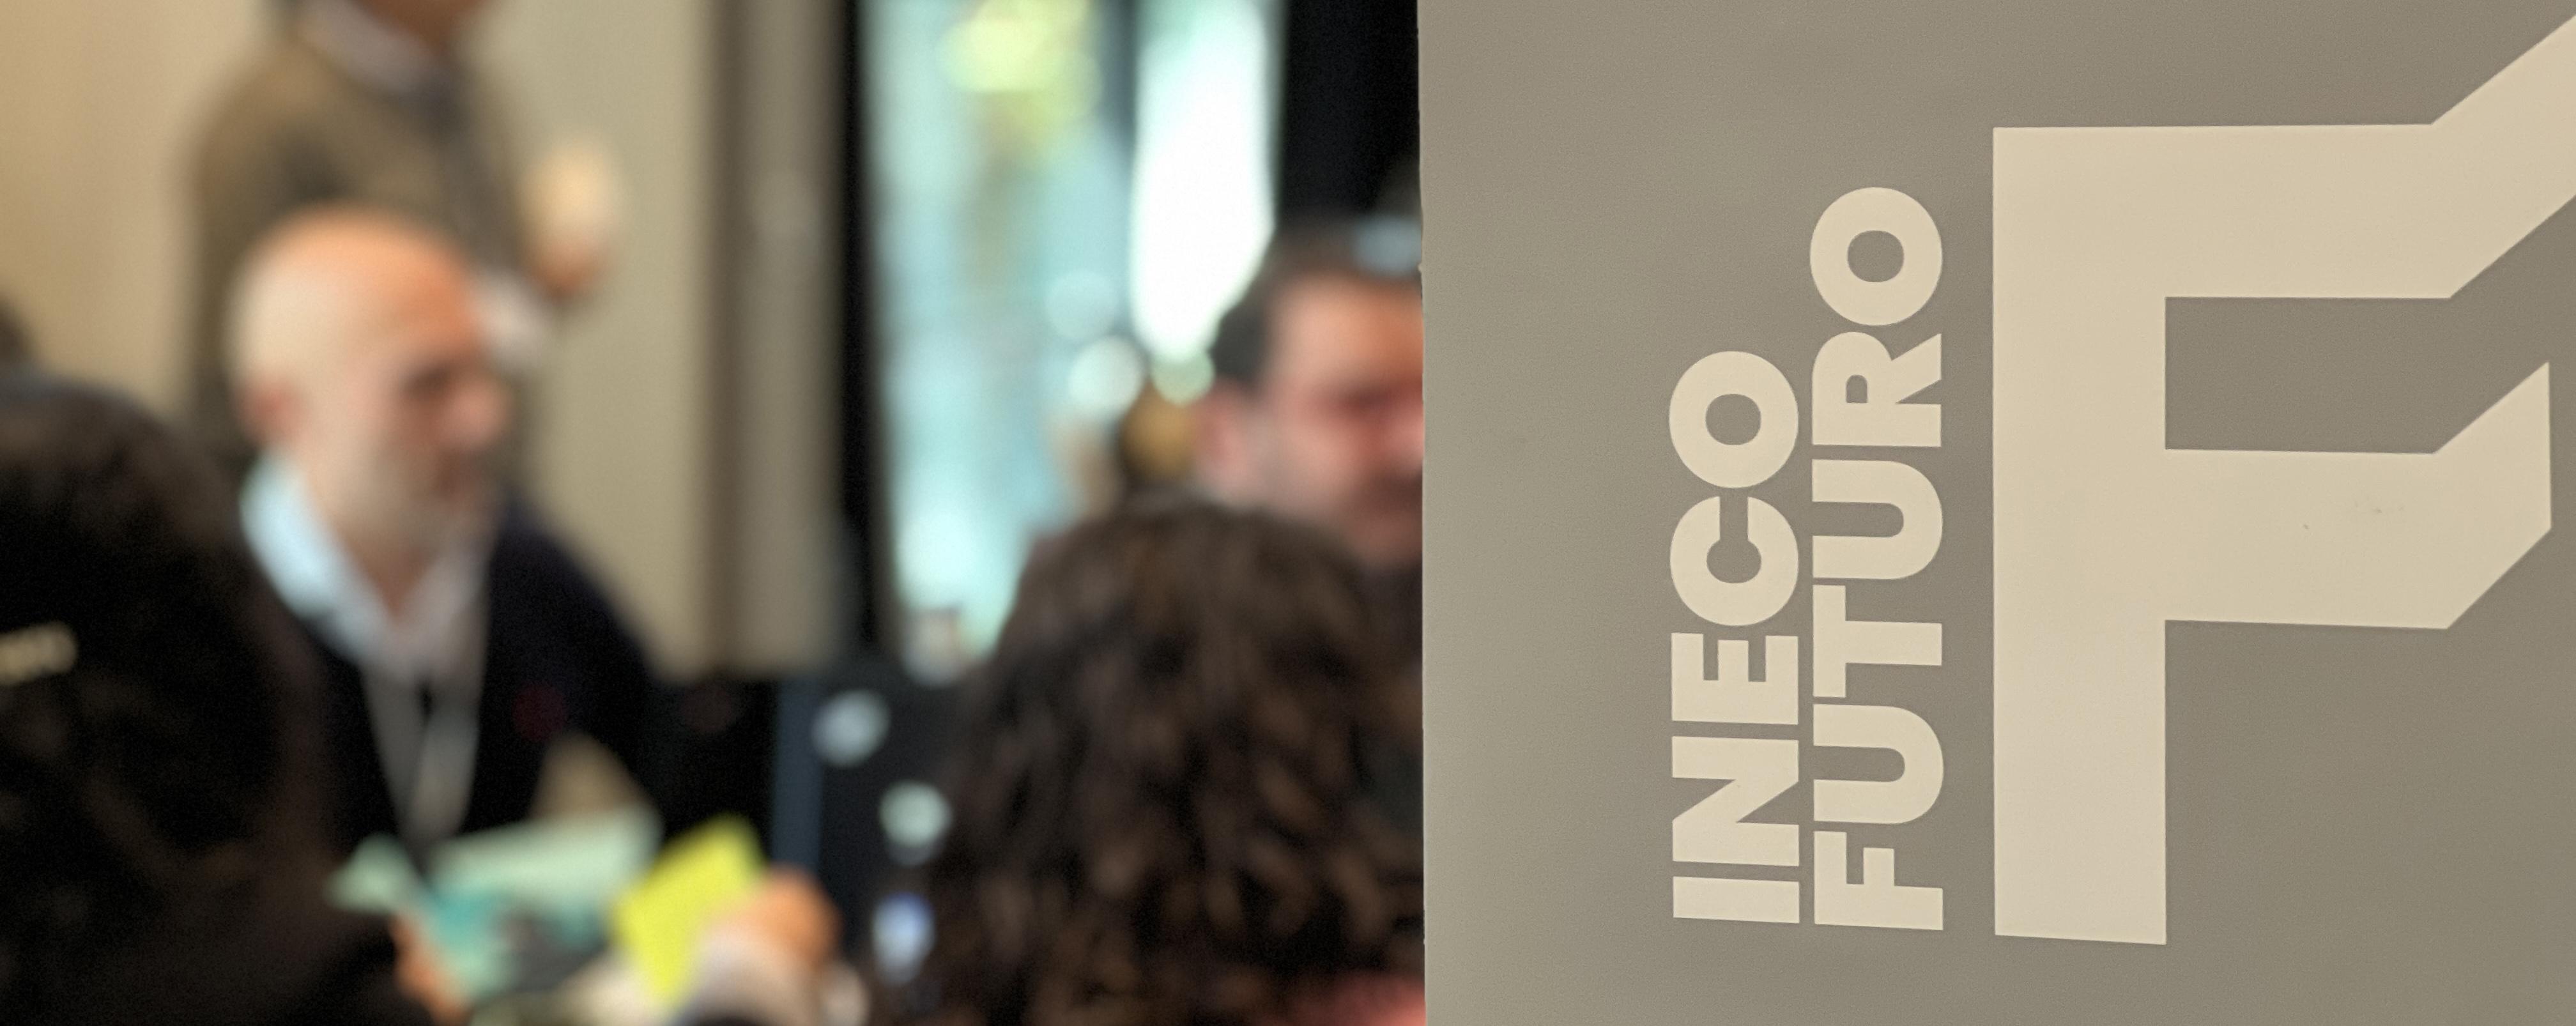 neco has selected 80 people from the organisation in working teams